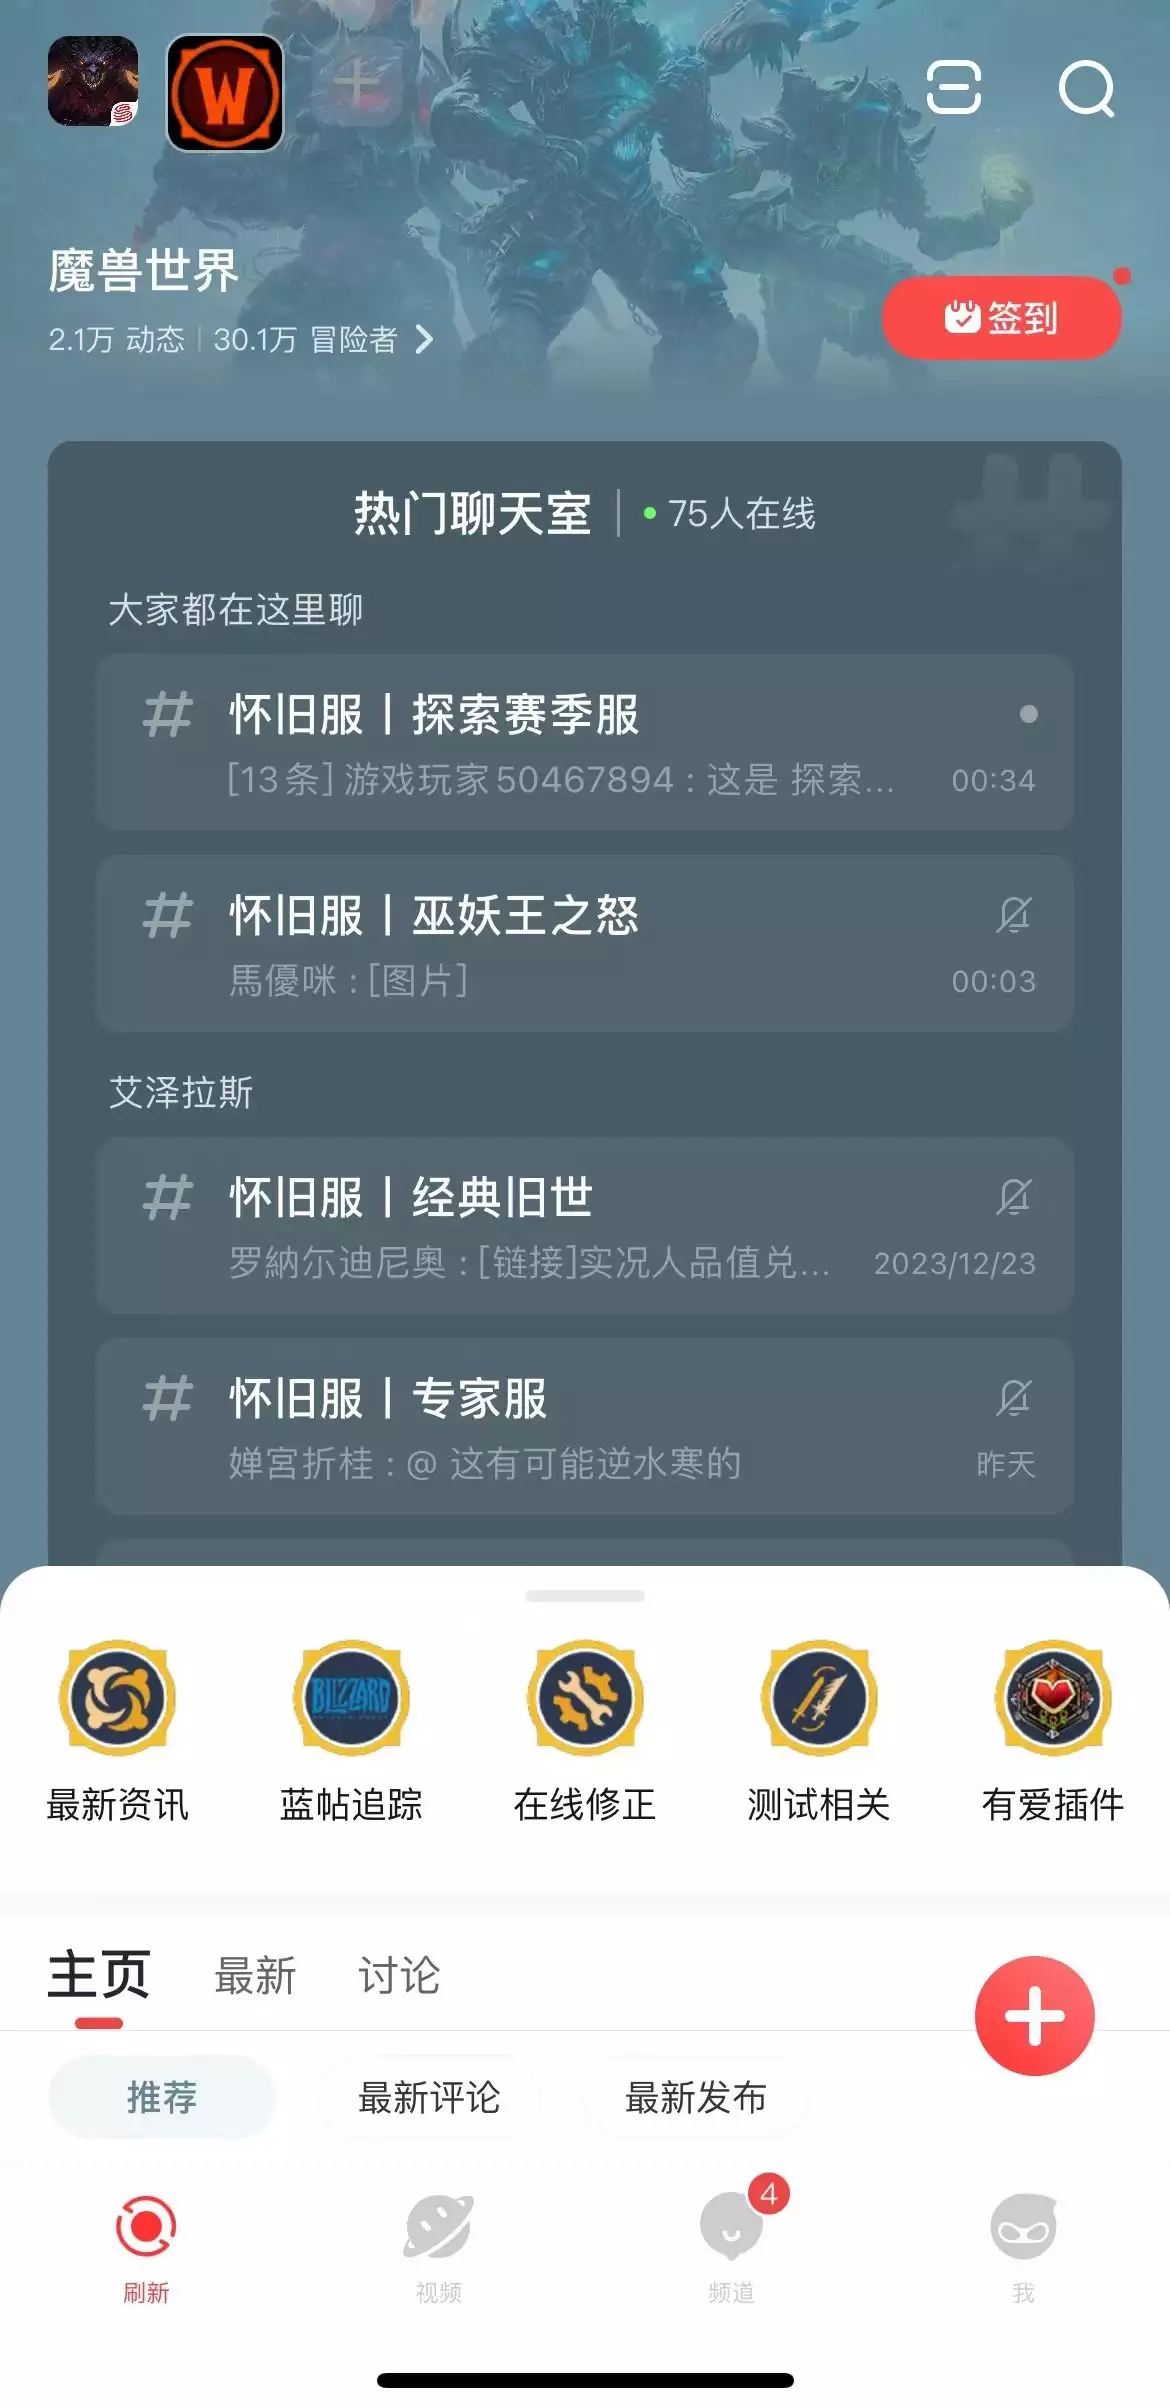 Netease Blizzard wants to ＂compound＂？Netease Game Forum starts to update the World of Warcraft content broadcast articles